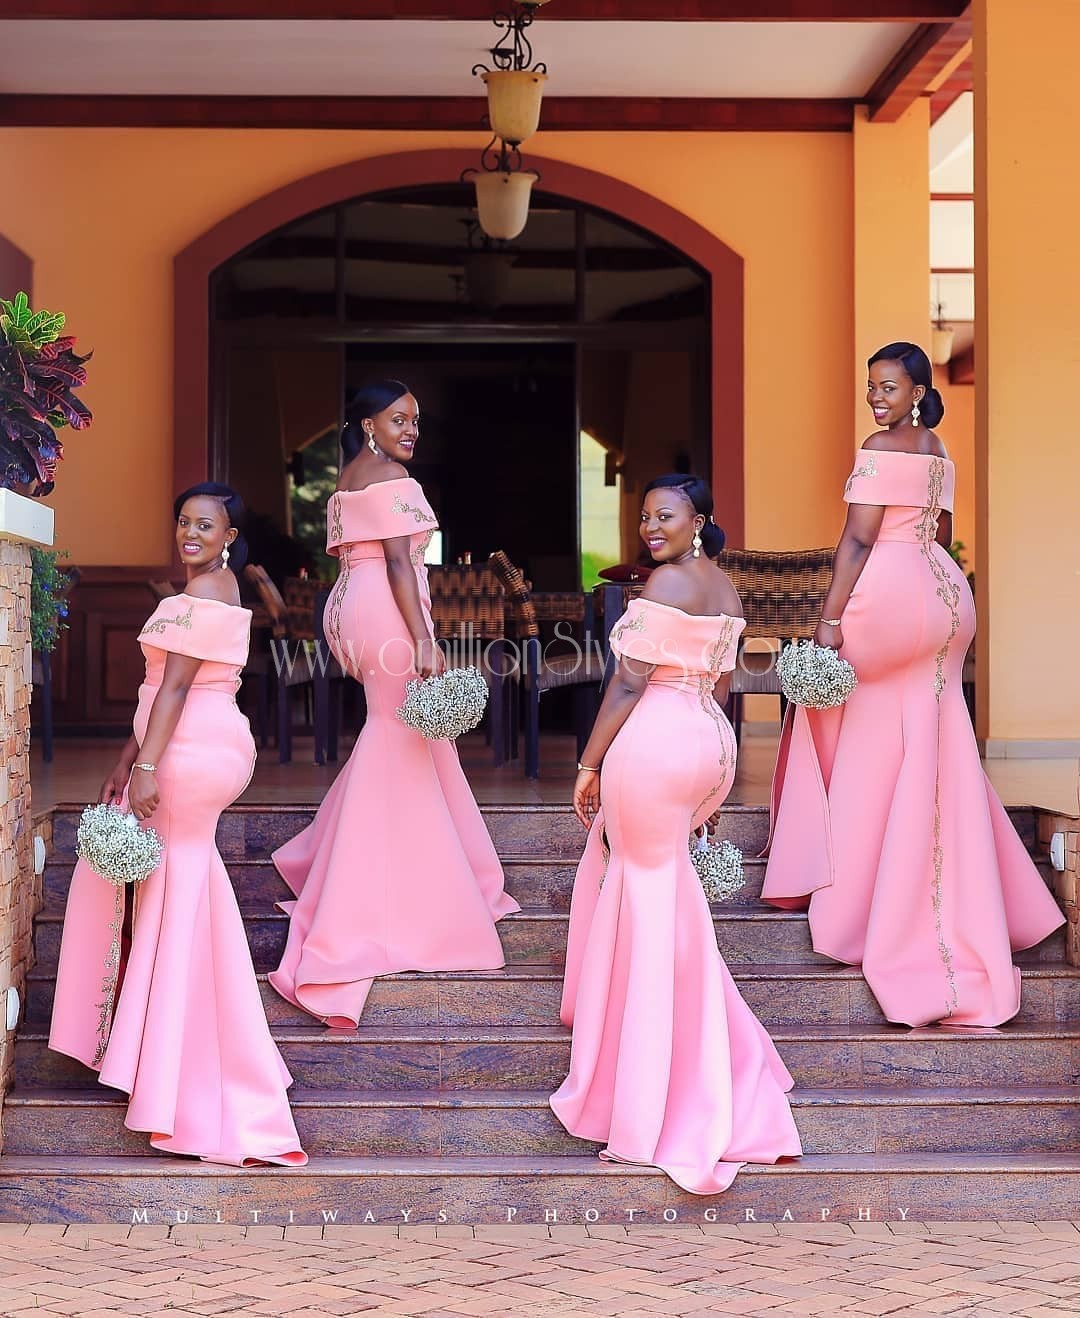 Ain't These Unique Bridesmaids Too Gorgeous For Words??